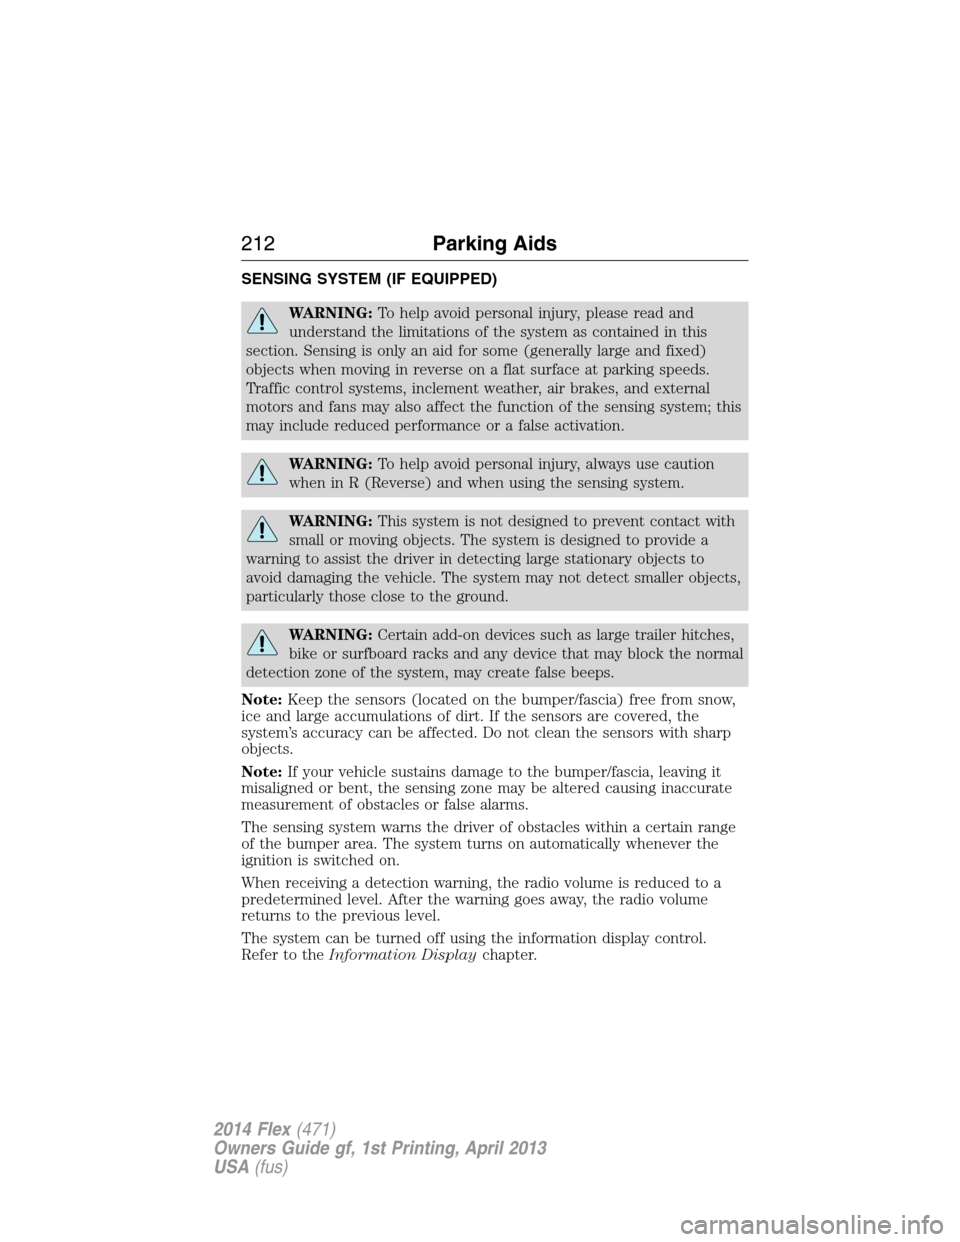 FORD FLEX 2014 1.G Owners Manual SENSING SYSTEM (IF EQUIPPED)
WARNING:To help avoid personal injury, please read and
understand the limitations of the system as contained in this
section. Sensing is only an aid for some (generally la